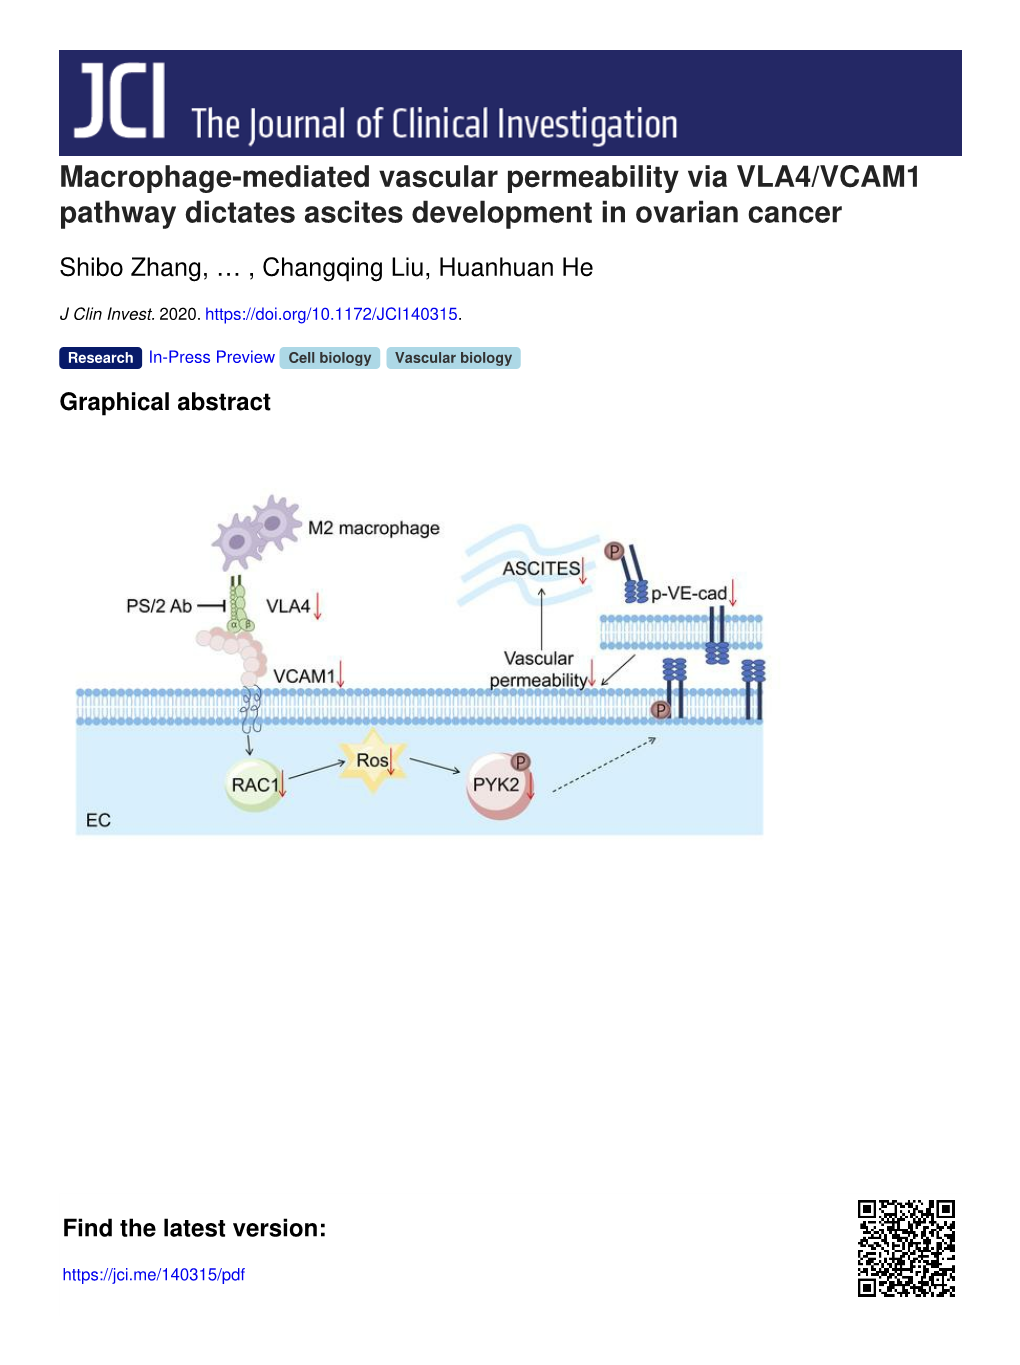 Macrophage-Mediated Vascular Permeability Via VLA4/VCAM1 Pathway Dictates Ascites Development in Ovarian Cancer